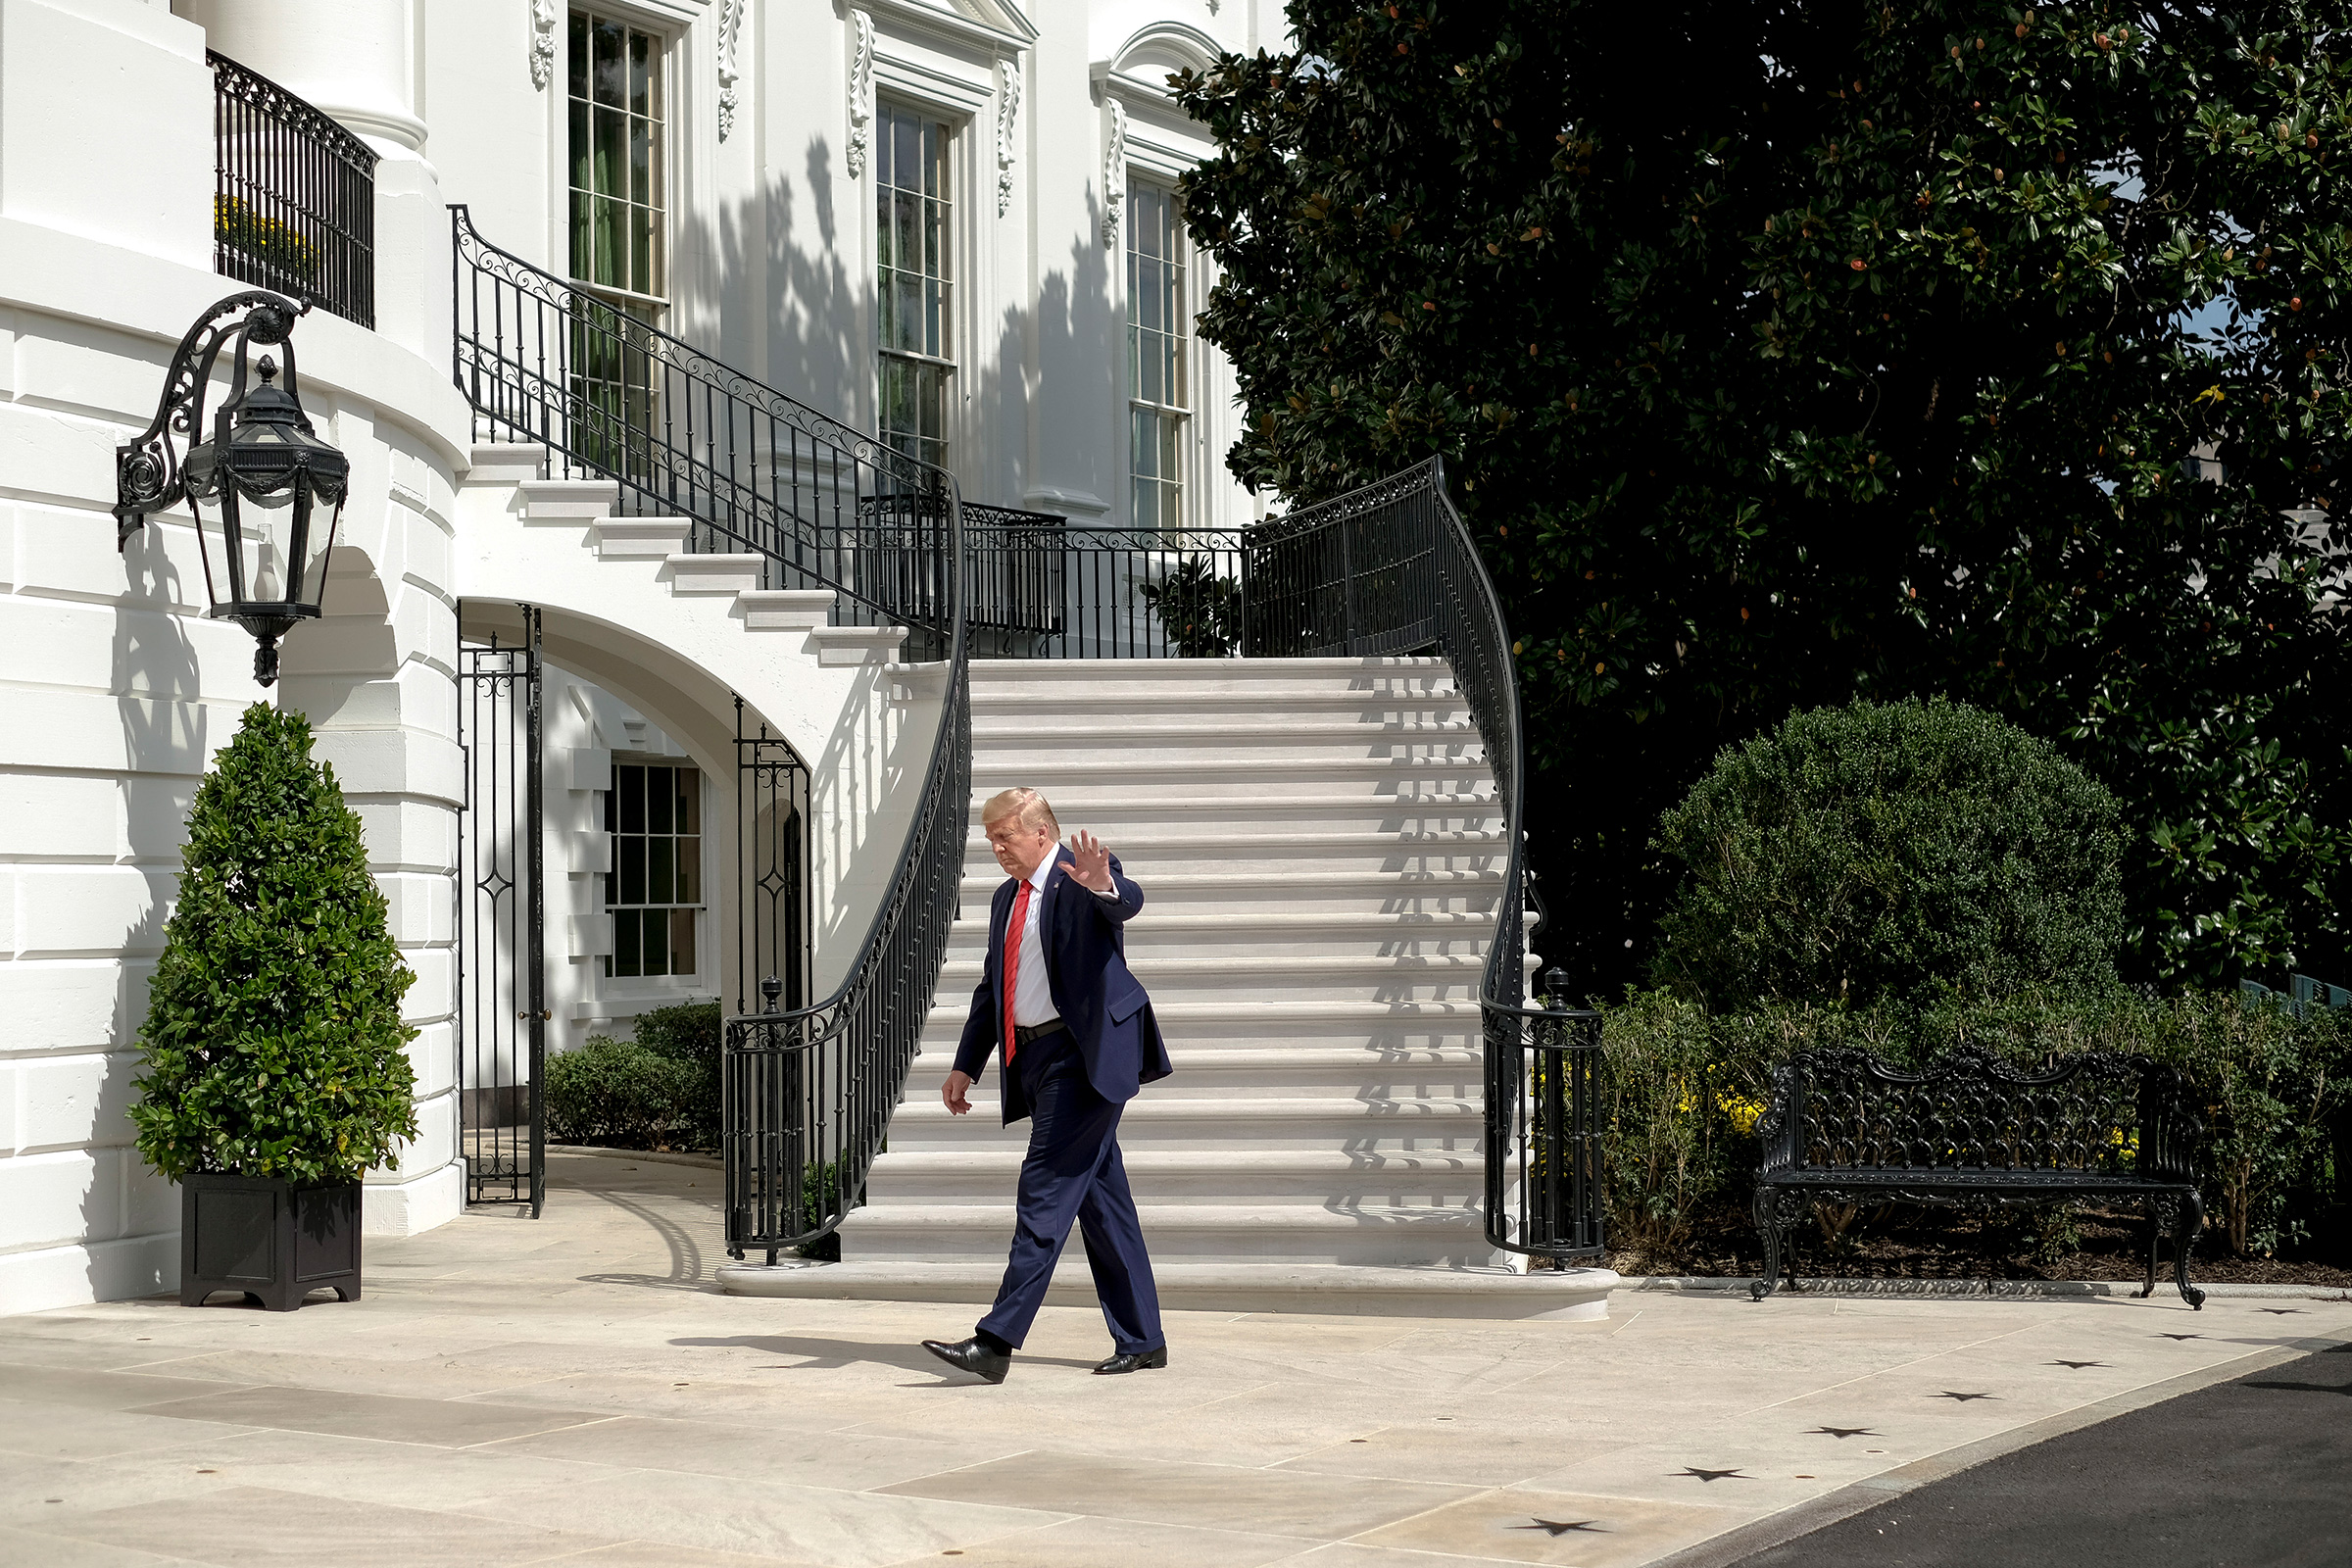 President Donald Trump arrives at the White House in Washington, D.C. on Sept. 26, 2019. (Gabriella Demczuk for TIME)